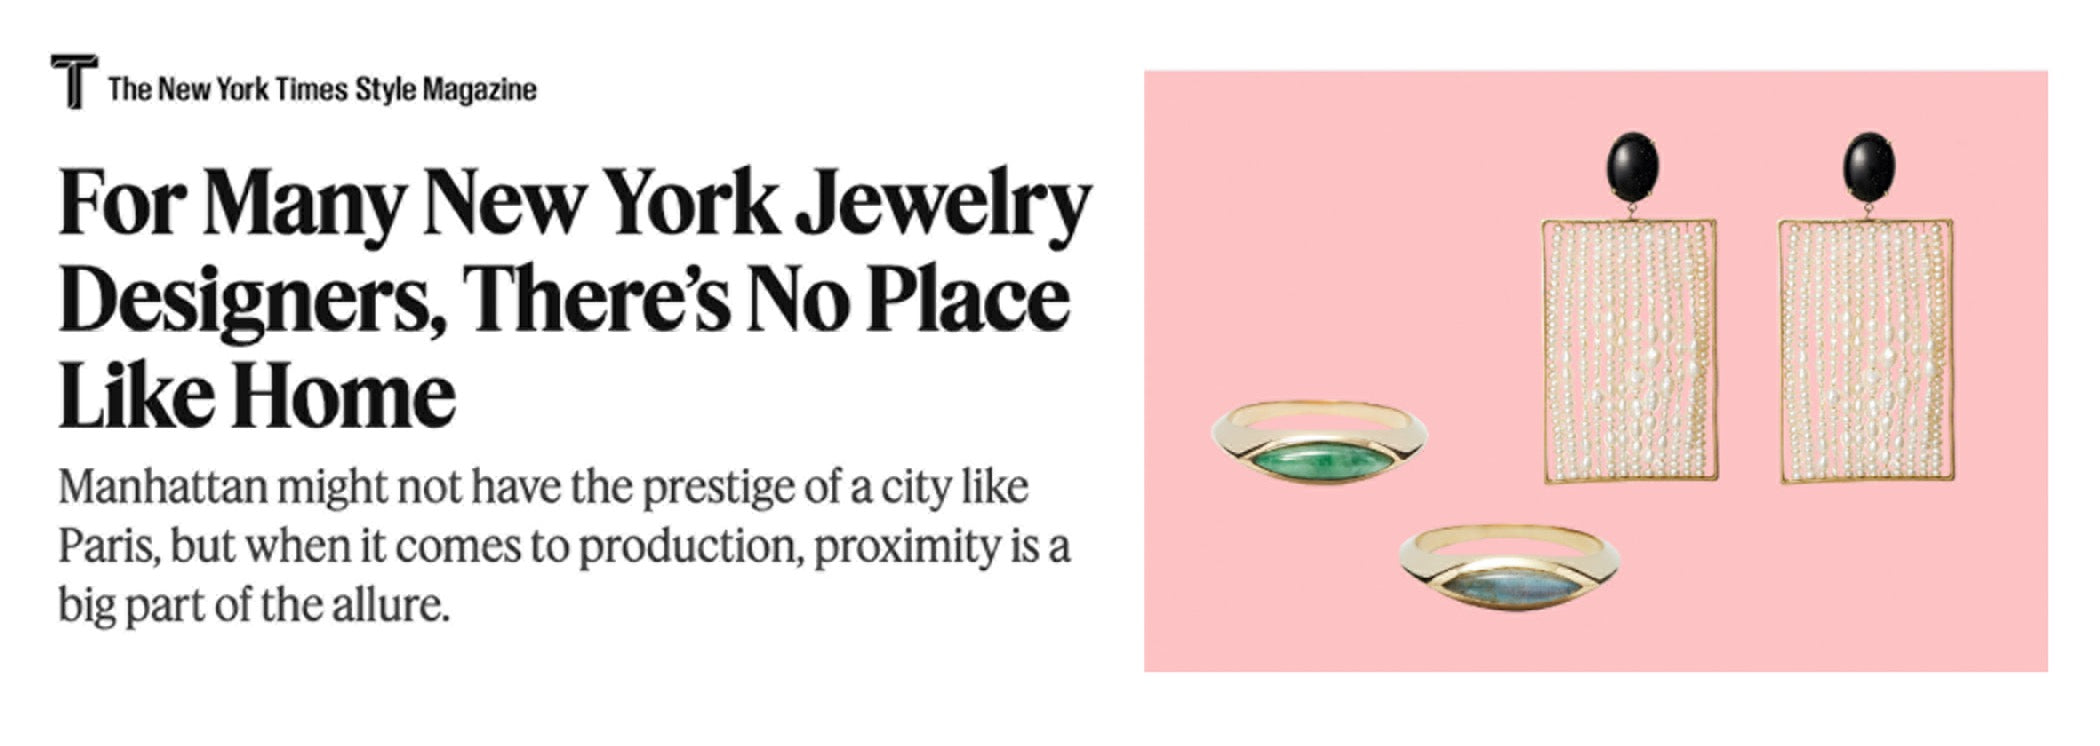 The New York Times Style Magazine | For Many New York Jewelry Designers, There’s No Place Like Home | Rachel Felder